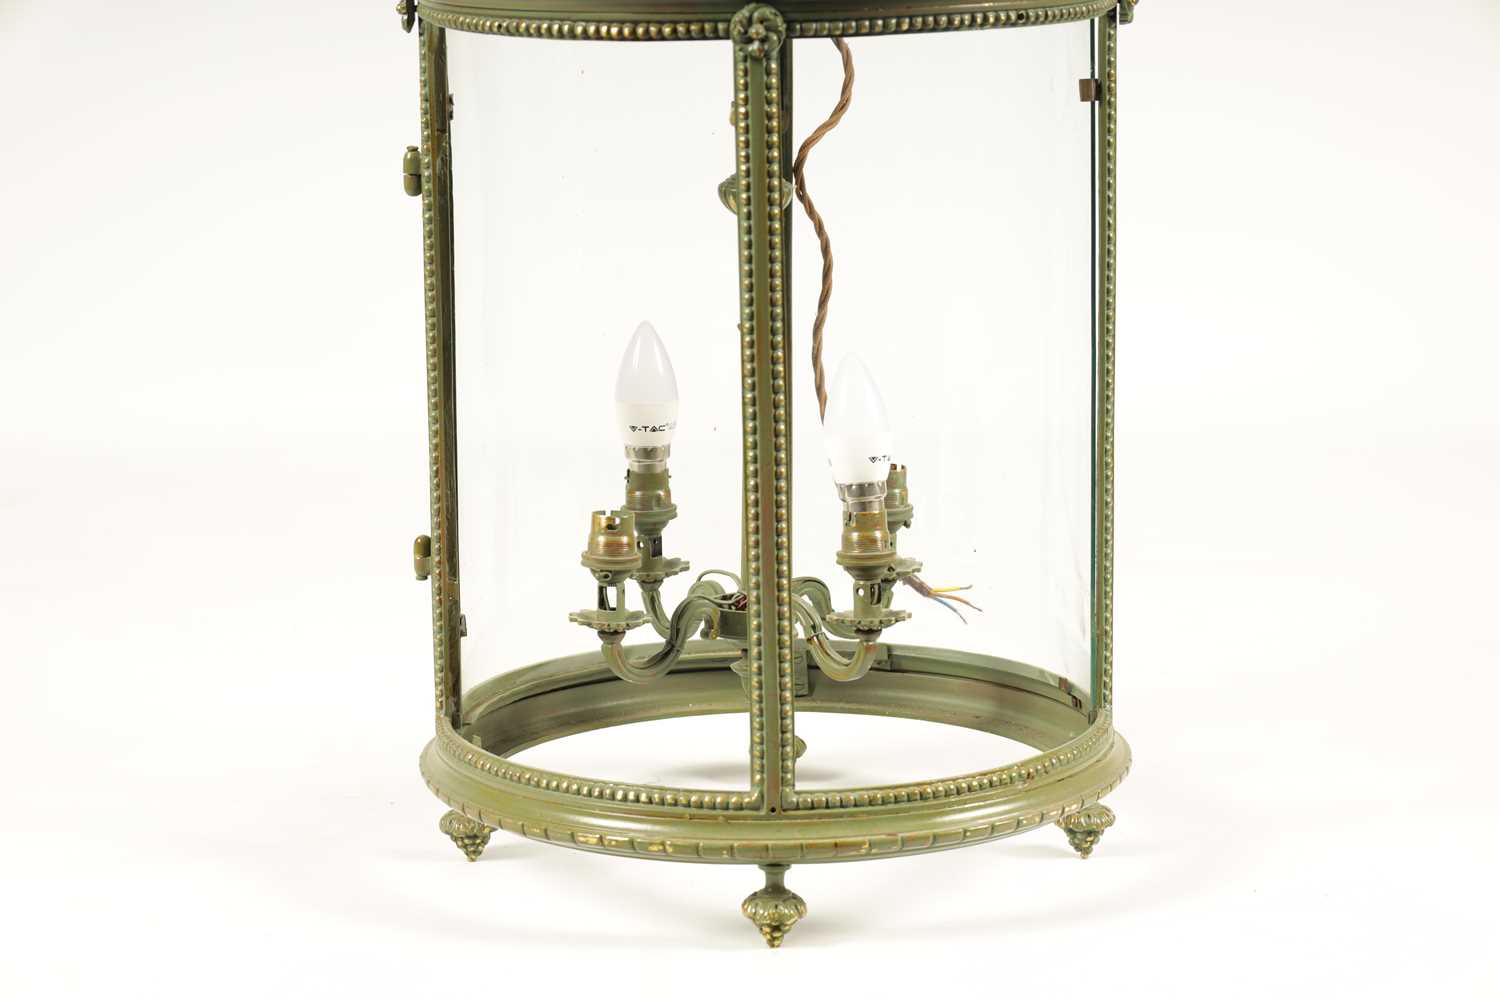 A LATE 19TH/EARLY 20TH CENTURY LATER PAINTED GILT BRASS HALL LANTERN OF LARGE SIZE - Image 3 of 6